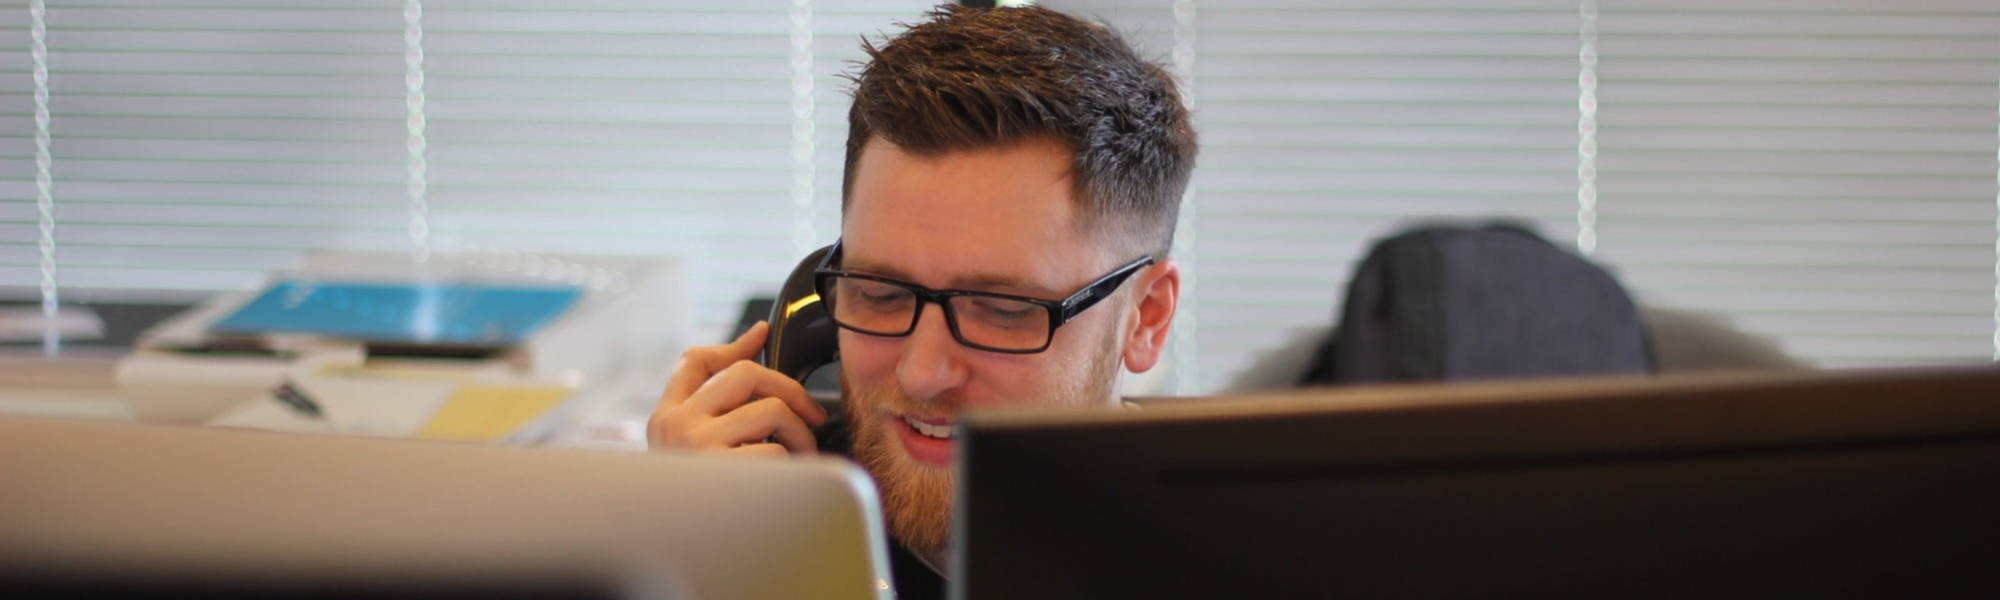 A Part Qualified finance professional speaks to an accountancy colleague on the phone